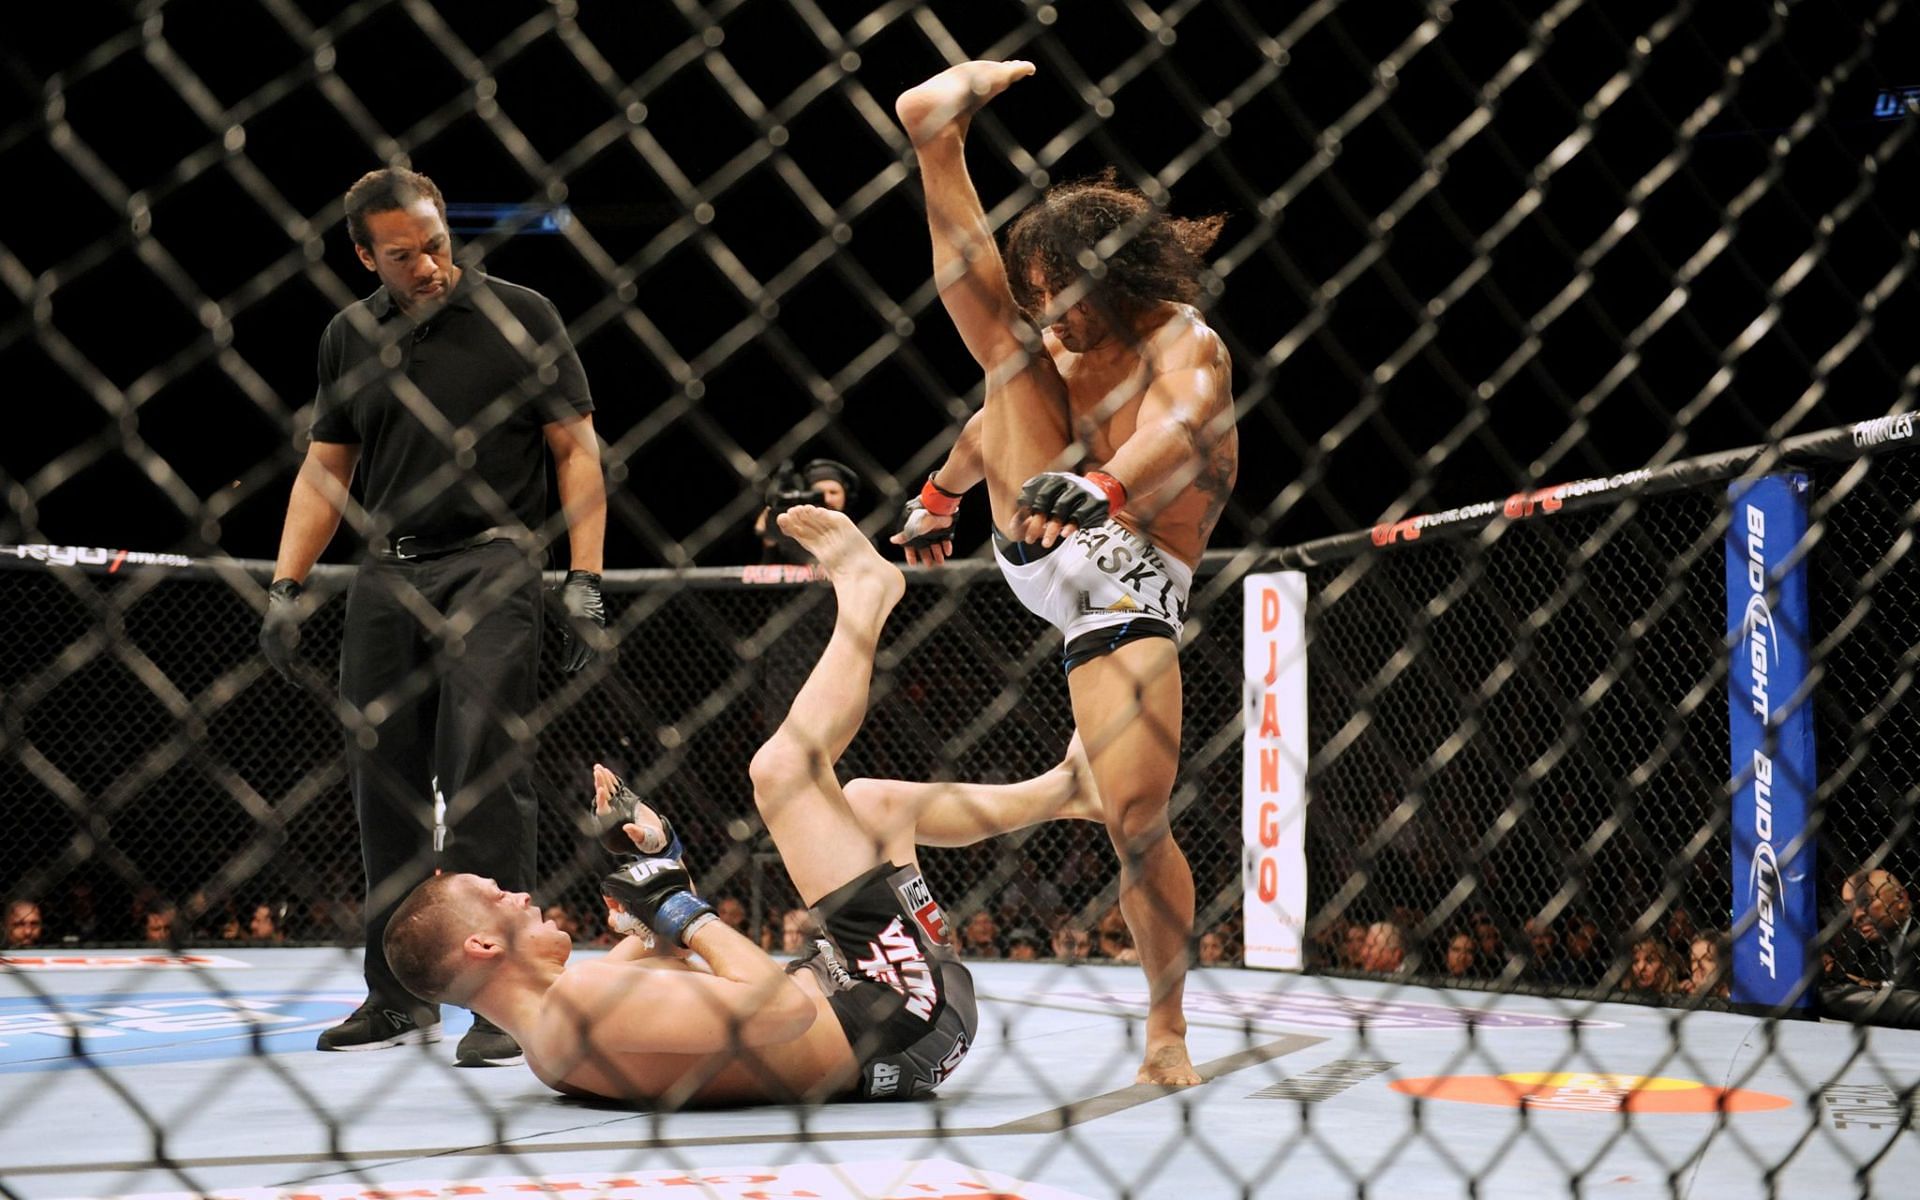 Nate Diaz would probably love a chance to avenge his 2012 loss to Benson Henderson